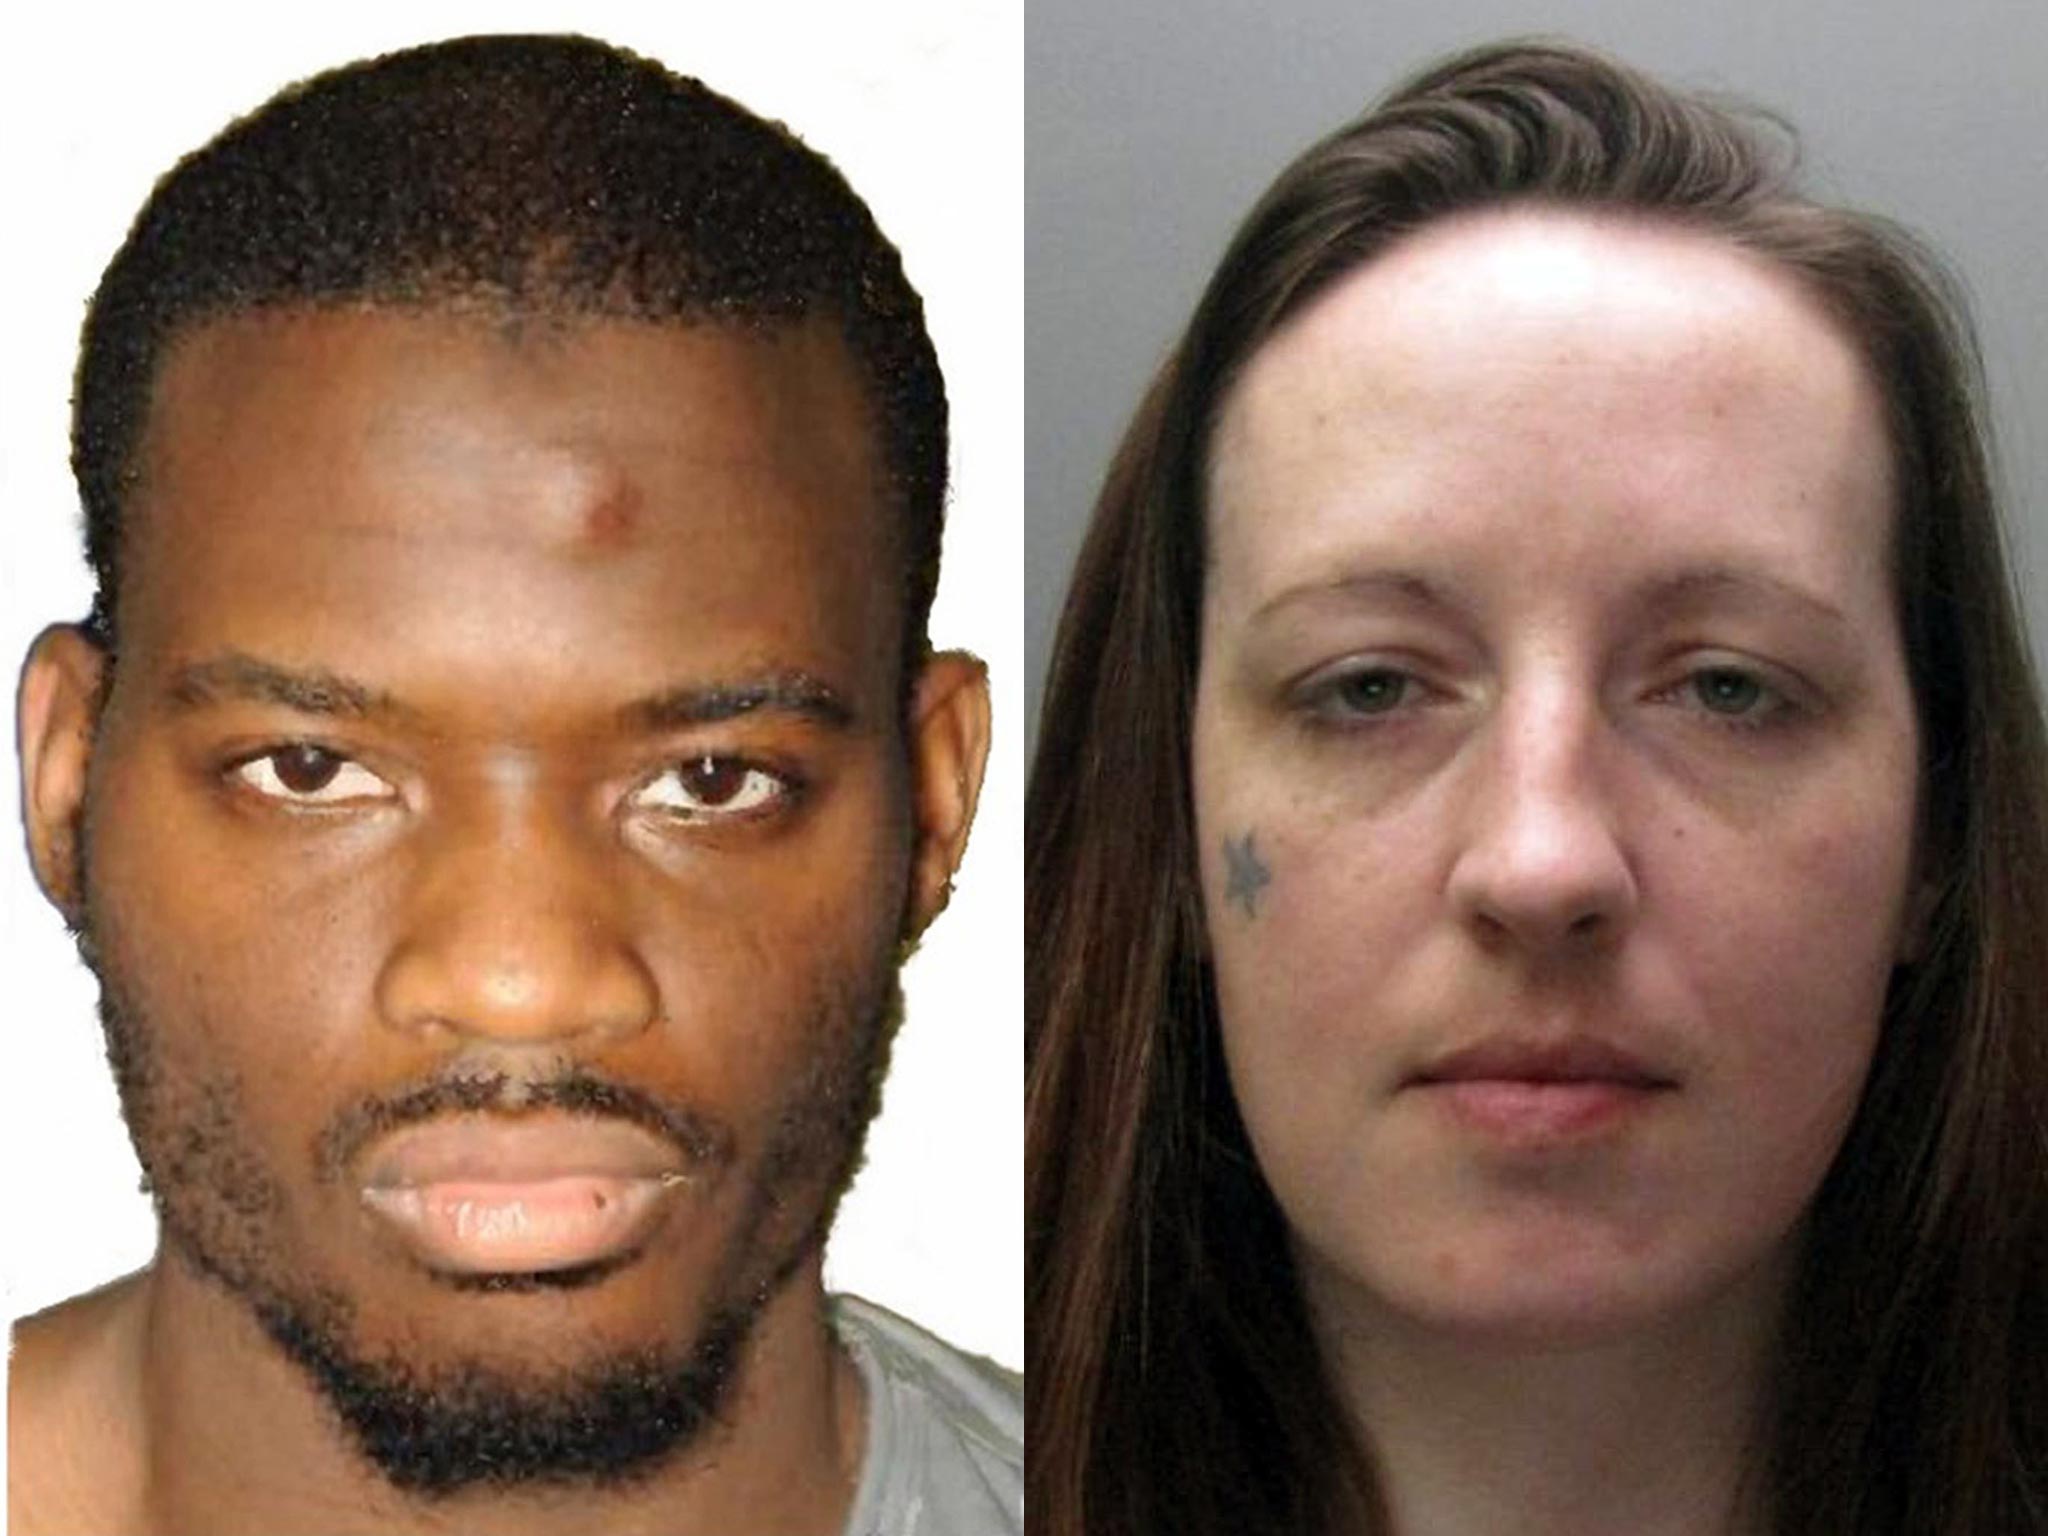 Michael Adebolajo and Joanna Dennehy have been given sentences for life